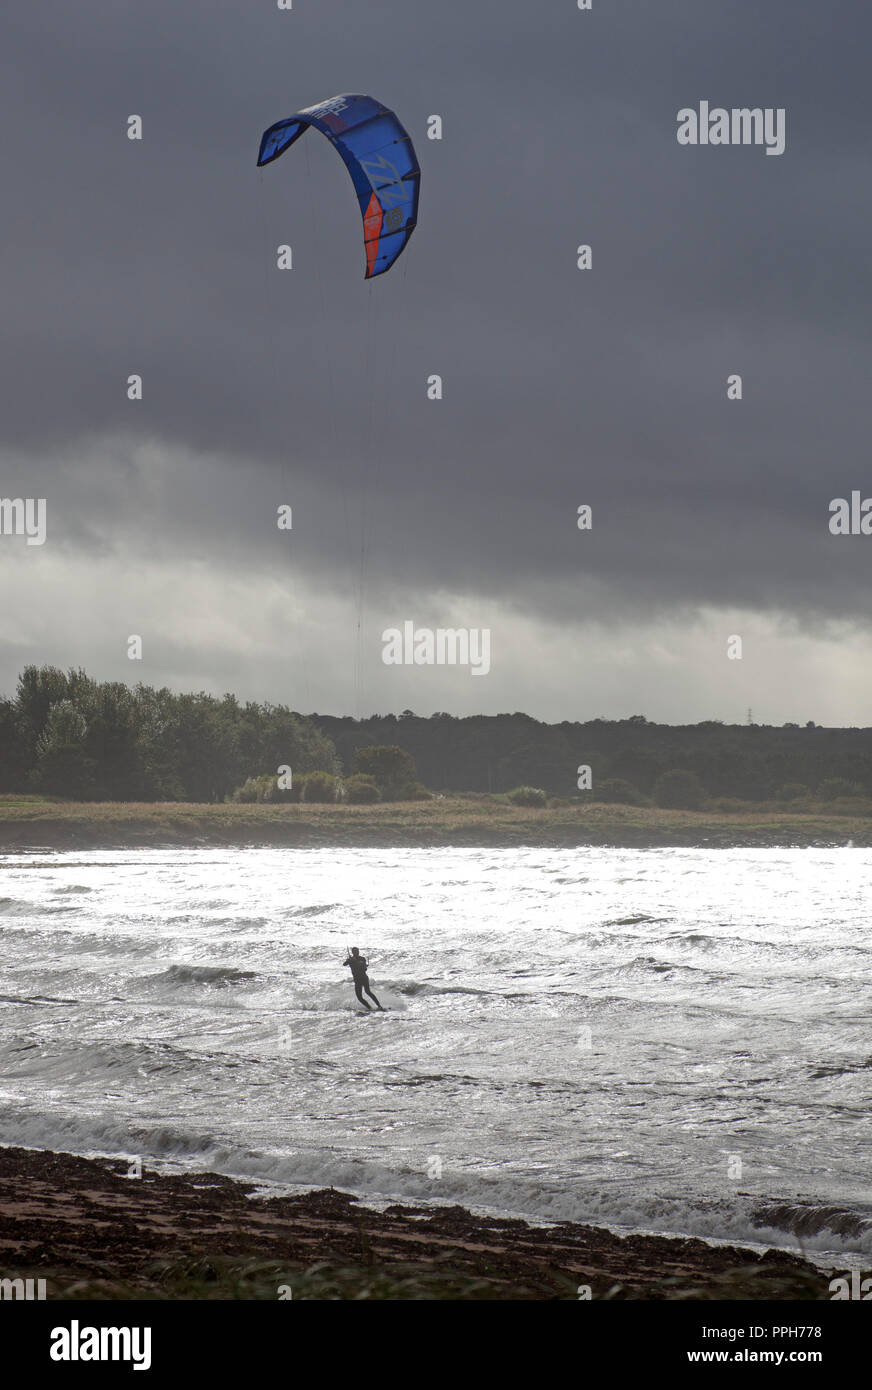 East Lothian, Scotland, UK weather, 26 September 2018. Testing conditions for Kitesurfer and windsurfer at Longniddry Bents, afternoon temperature of 18 degrees and wind with estimated gusts of 39km/h together with squally showers, and Arthur's Seat and the city of Edinburgh in the background. Stock Photo